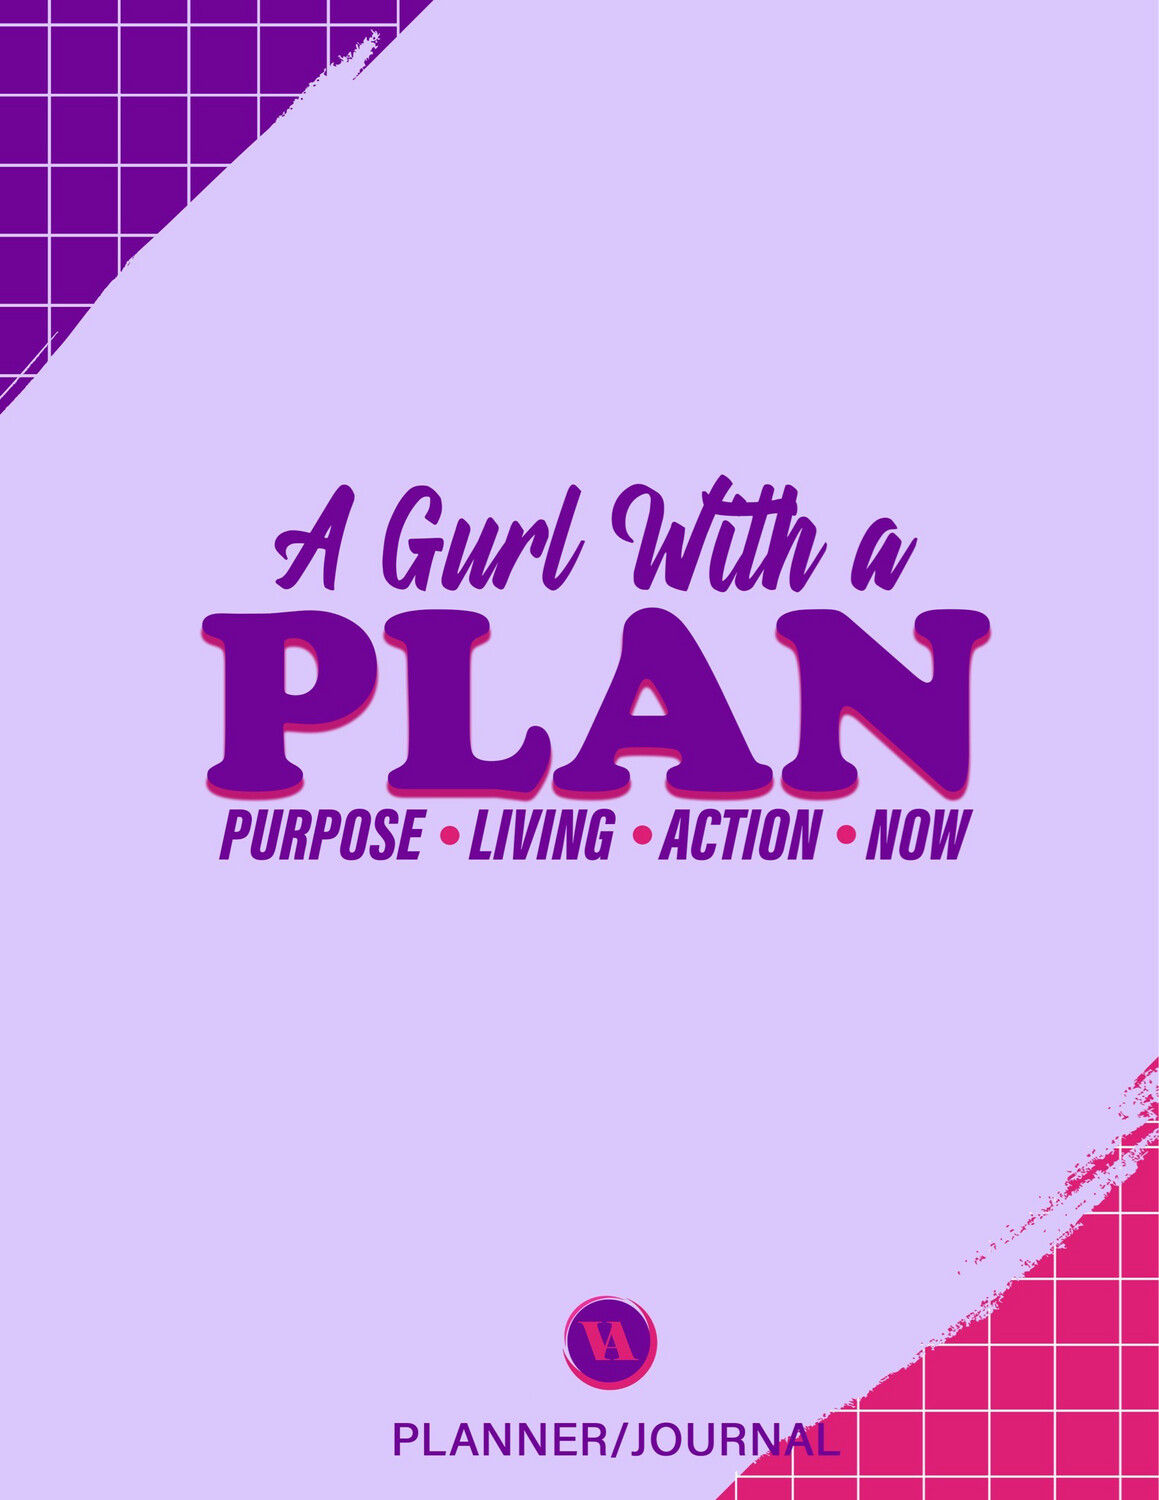 A Gurl With A PLAN (Purpose Living Action NOW!) By Dagne Barton